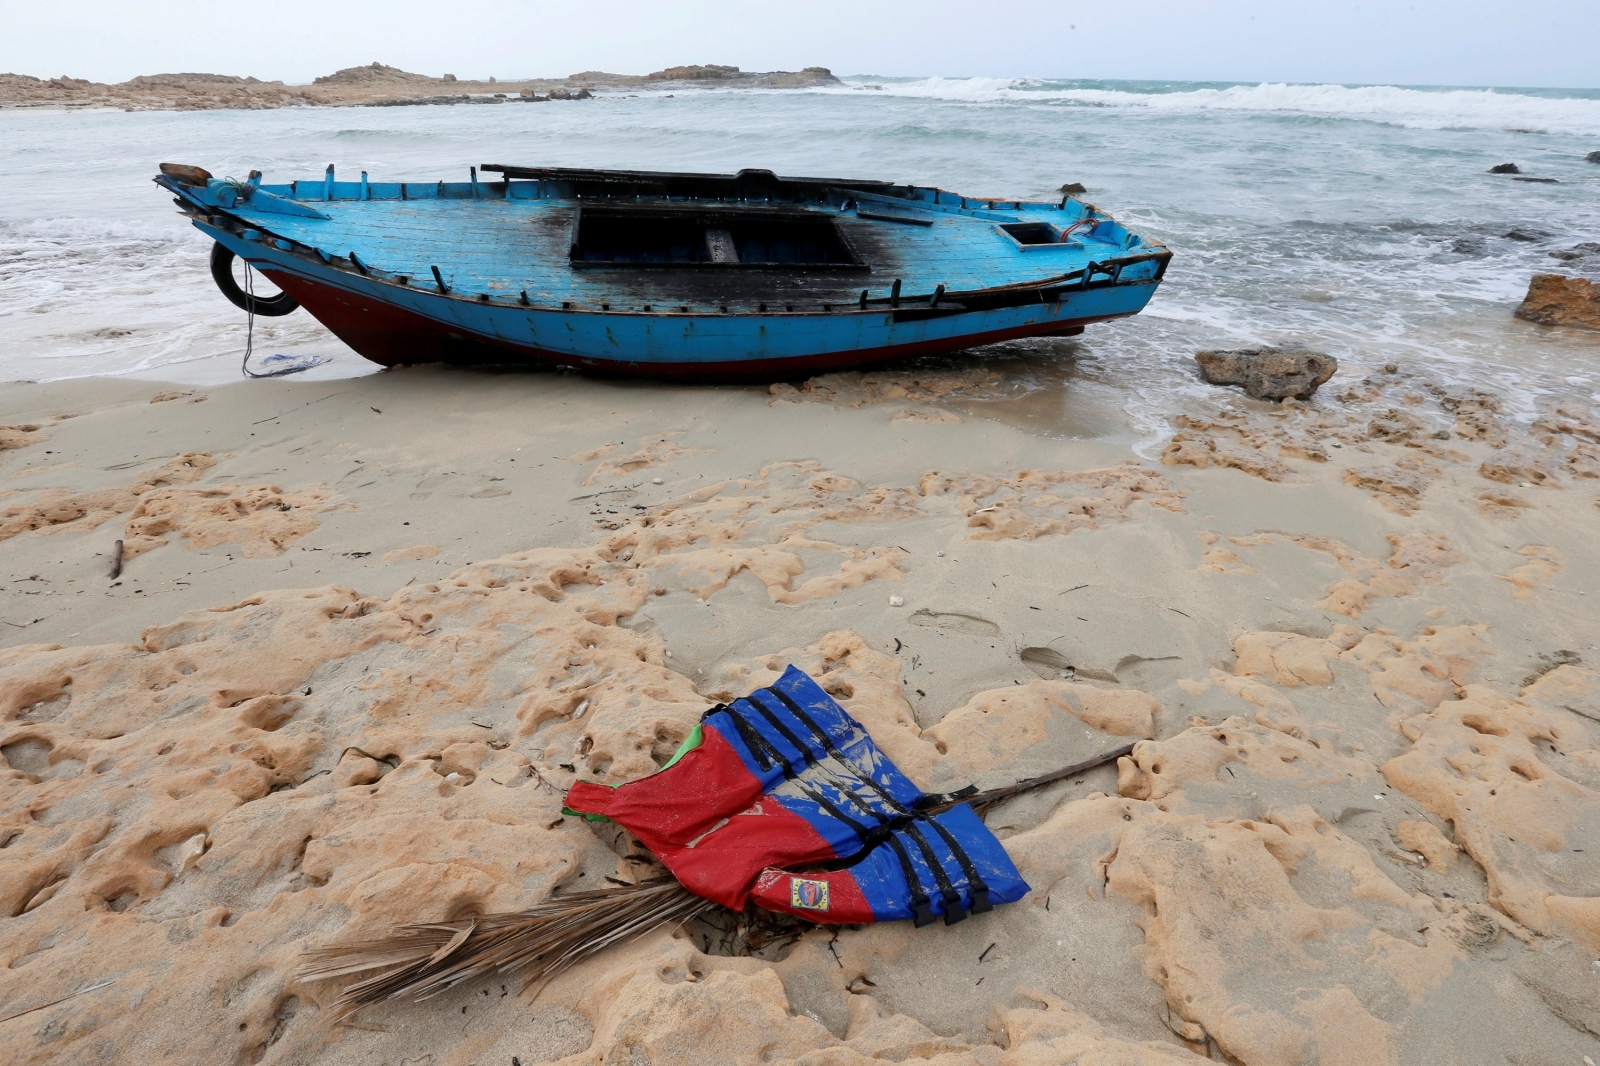 FILE PHOTO: A boat used by migrants is seen near the western town of Sabratha FILE PHOTO: A boat used by migrants is seen near the western town of Sabratha, Libya March 19, 2019. REUTERS/Ismail Zitouny/File Photo Ismail Zetouni